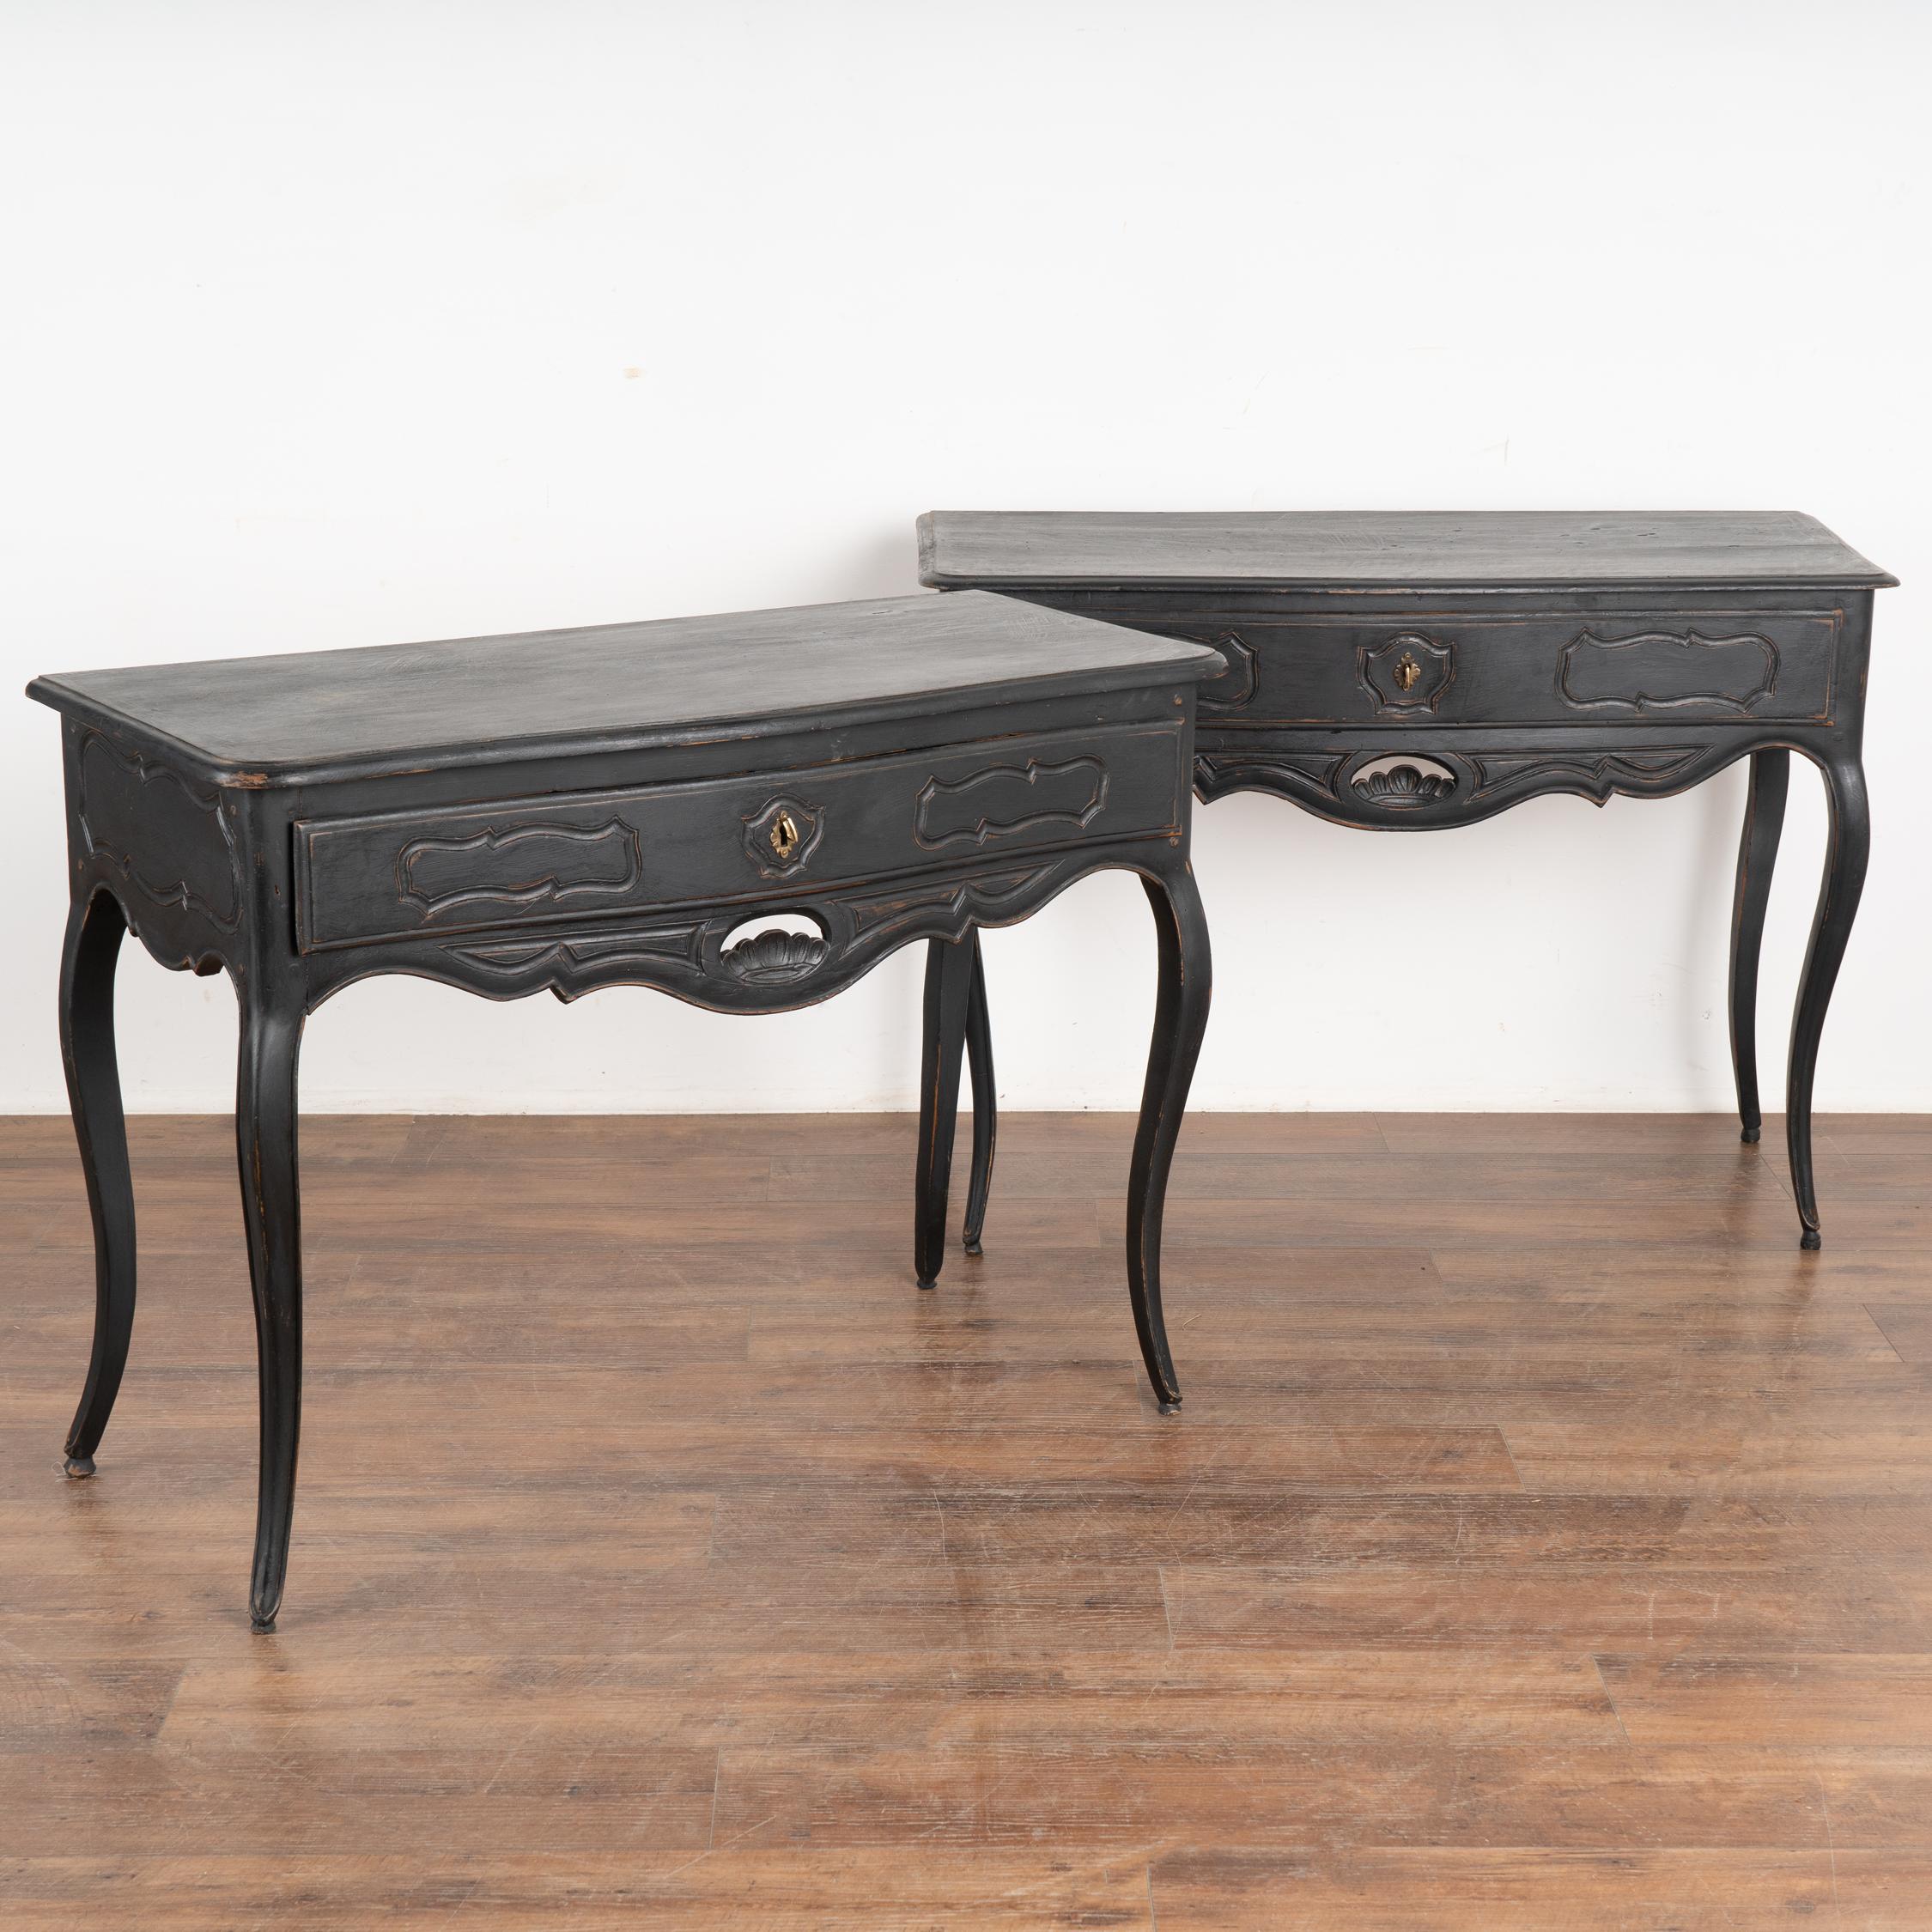 Pair of black painted oak side tables. The curved cabriolet legs, carved drawer, skirt and sides add a romantic appeal.
The newer, custom applied black painted finish has been lightly distressed to fit the age and grace of these delightful accent